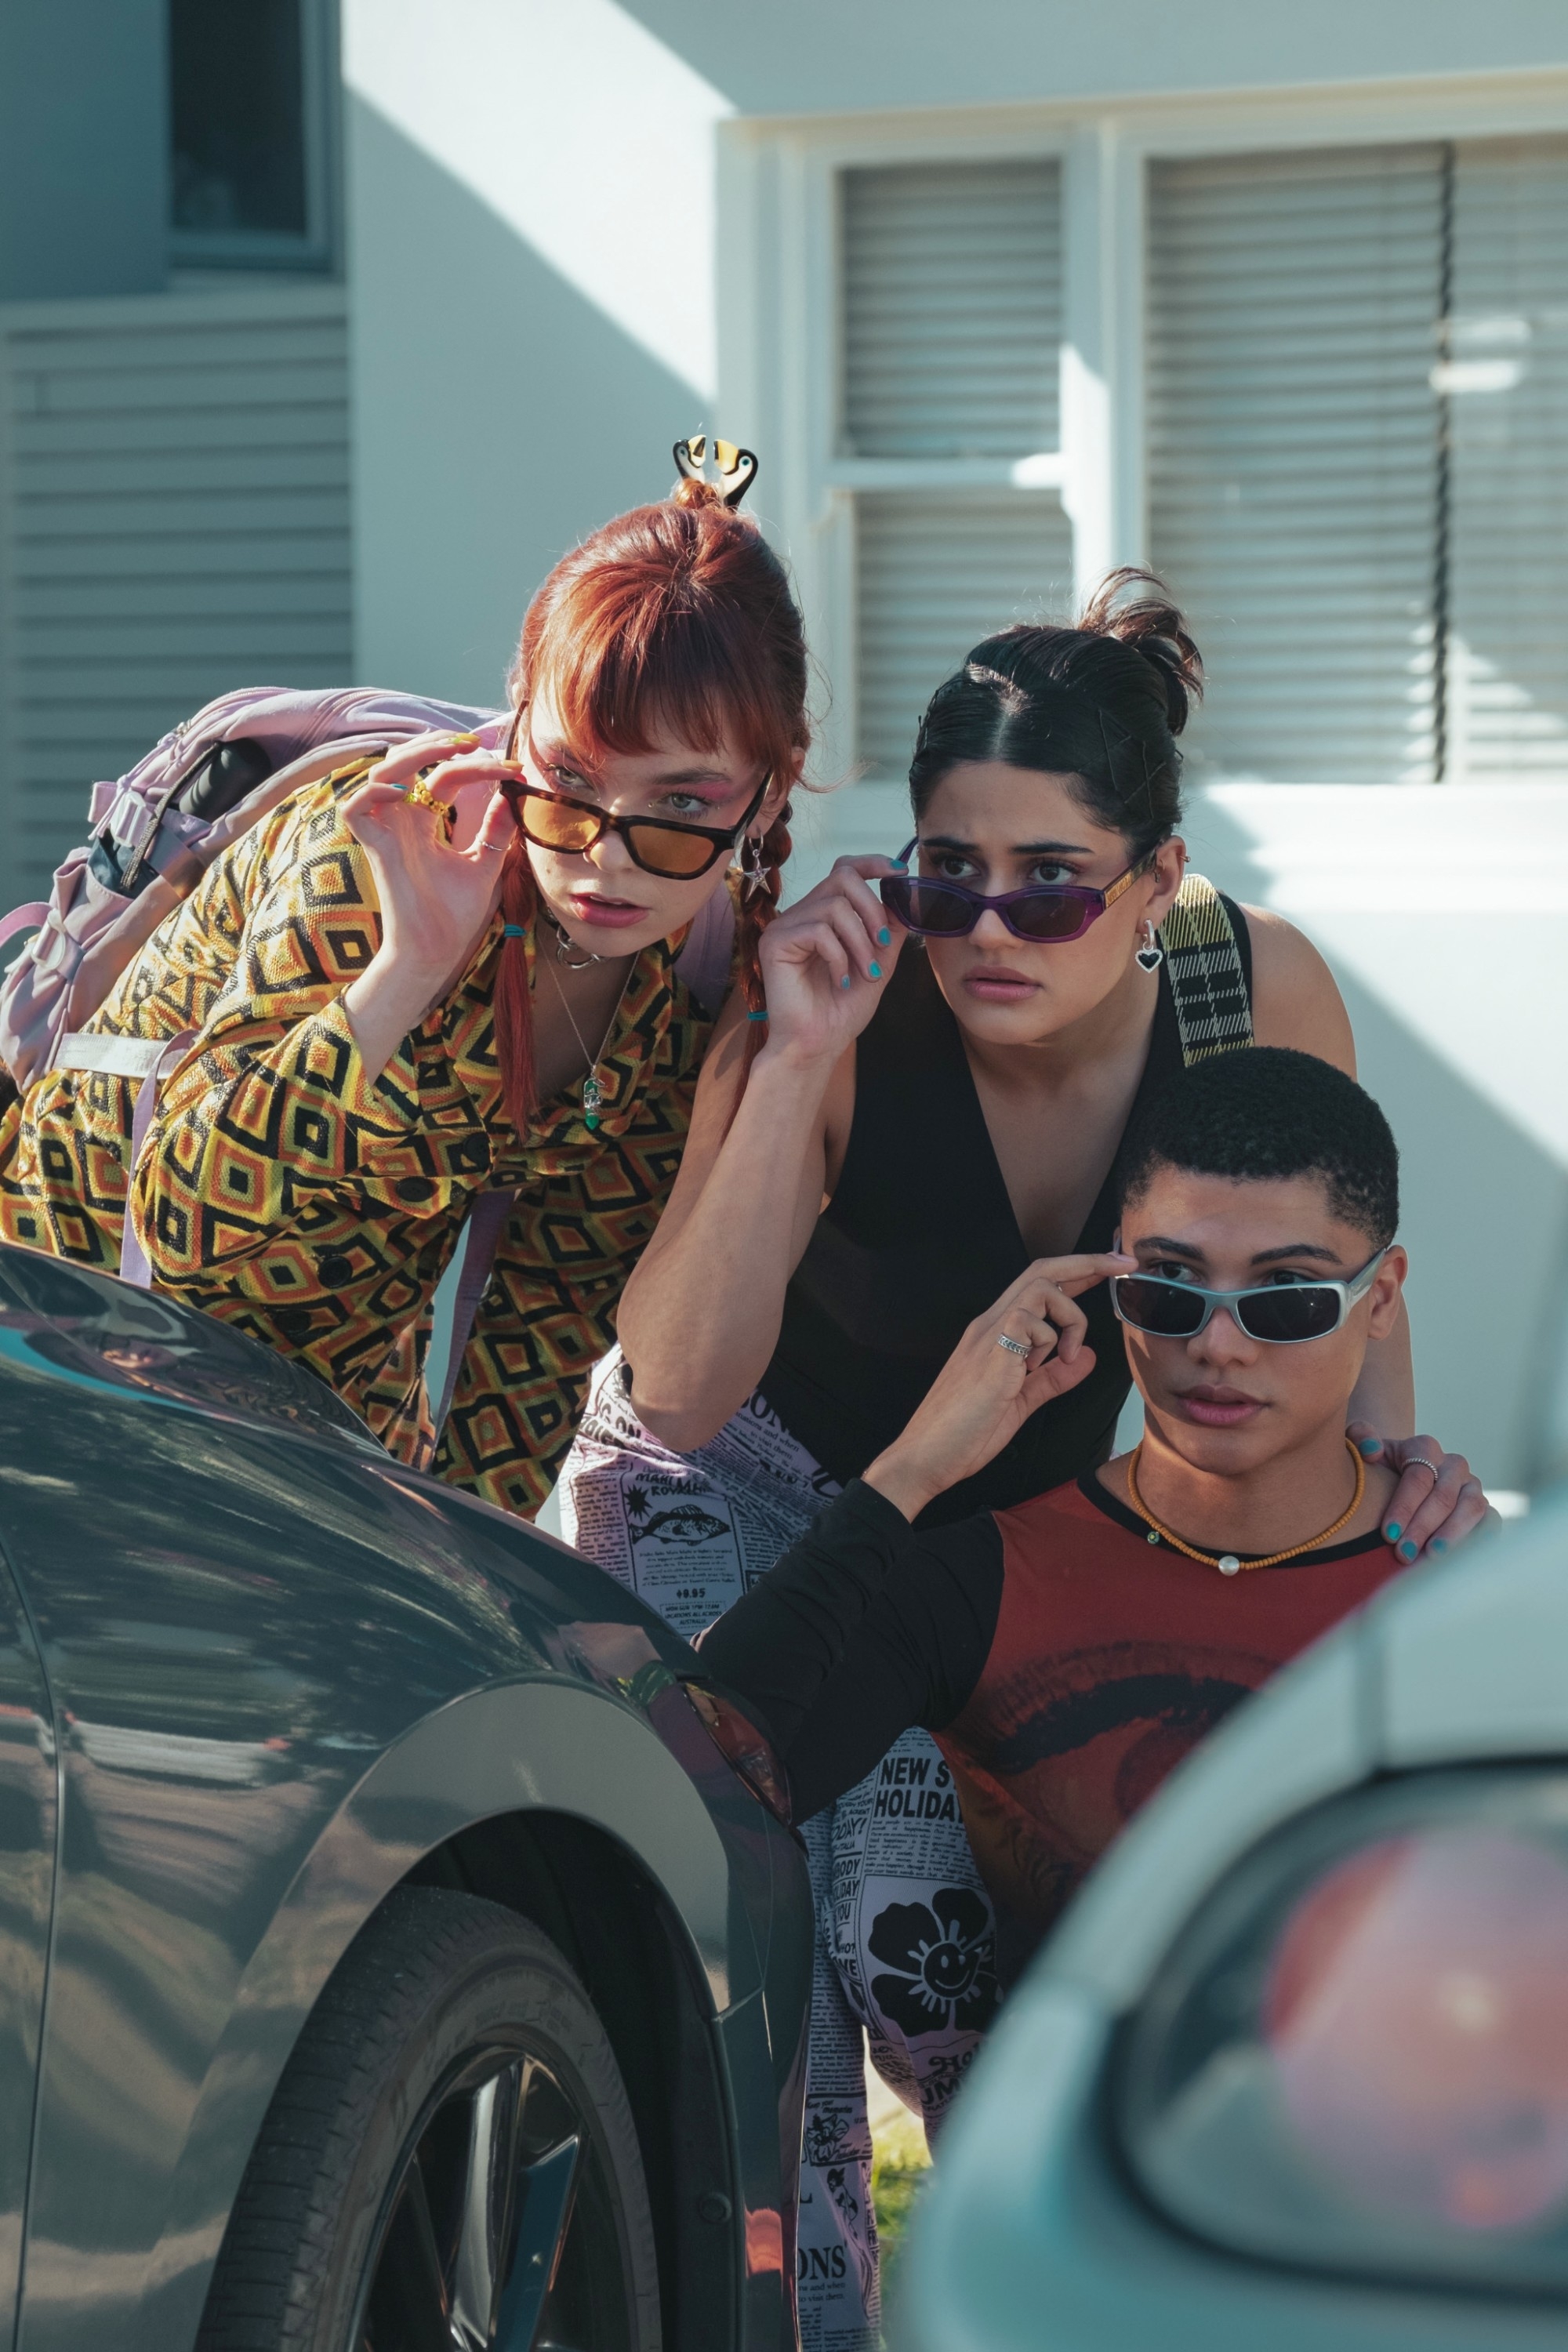 Three actors in a scene from a show, wearing stylish outfits, standing by a car with sunglasses